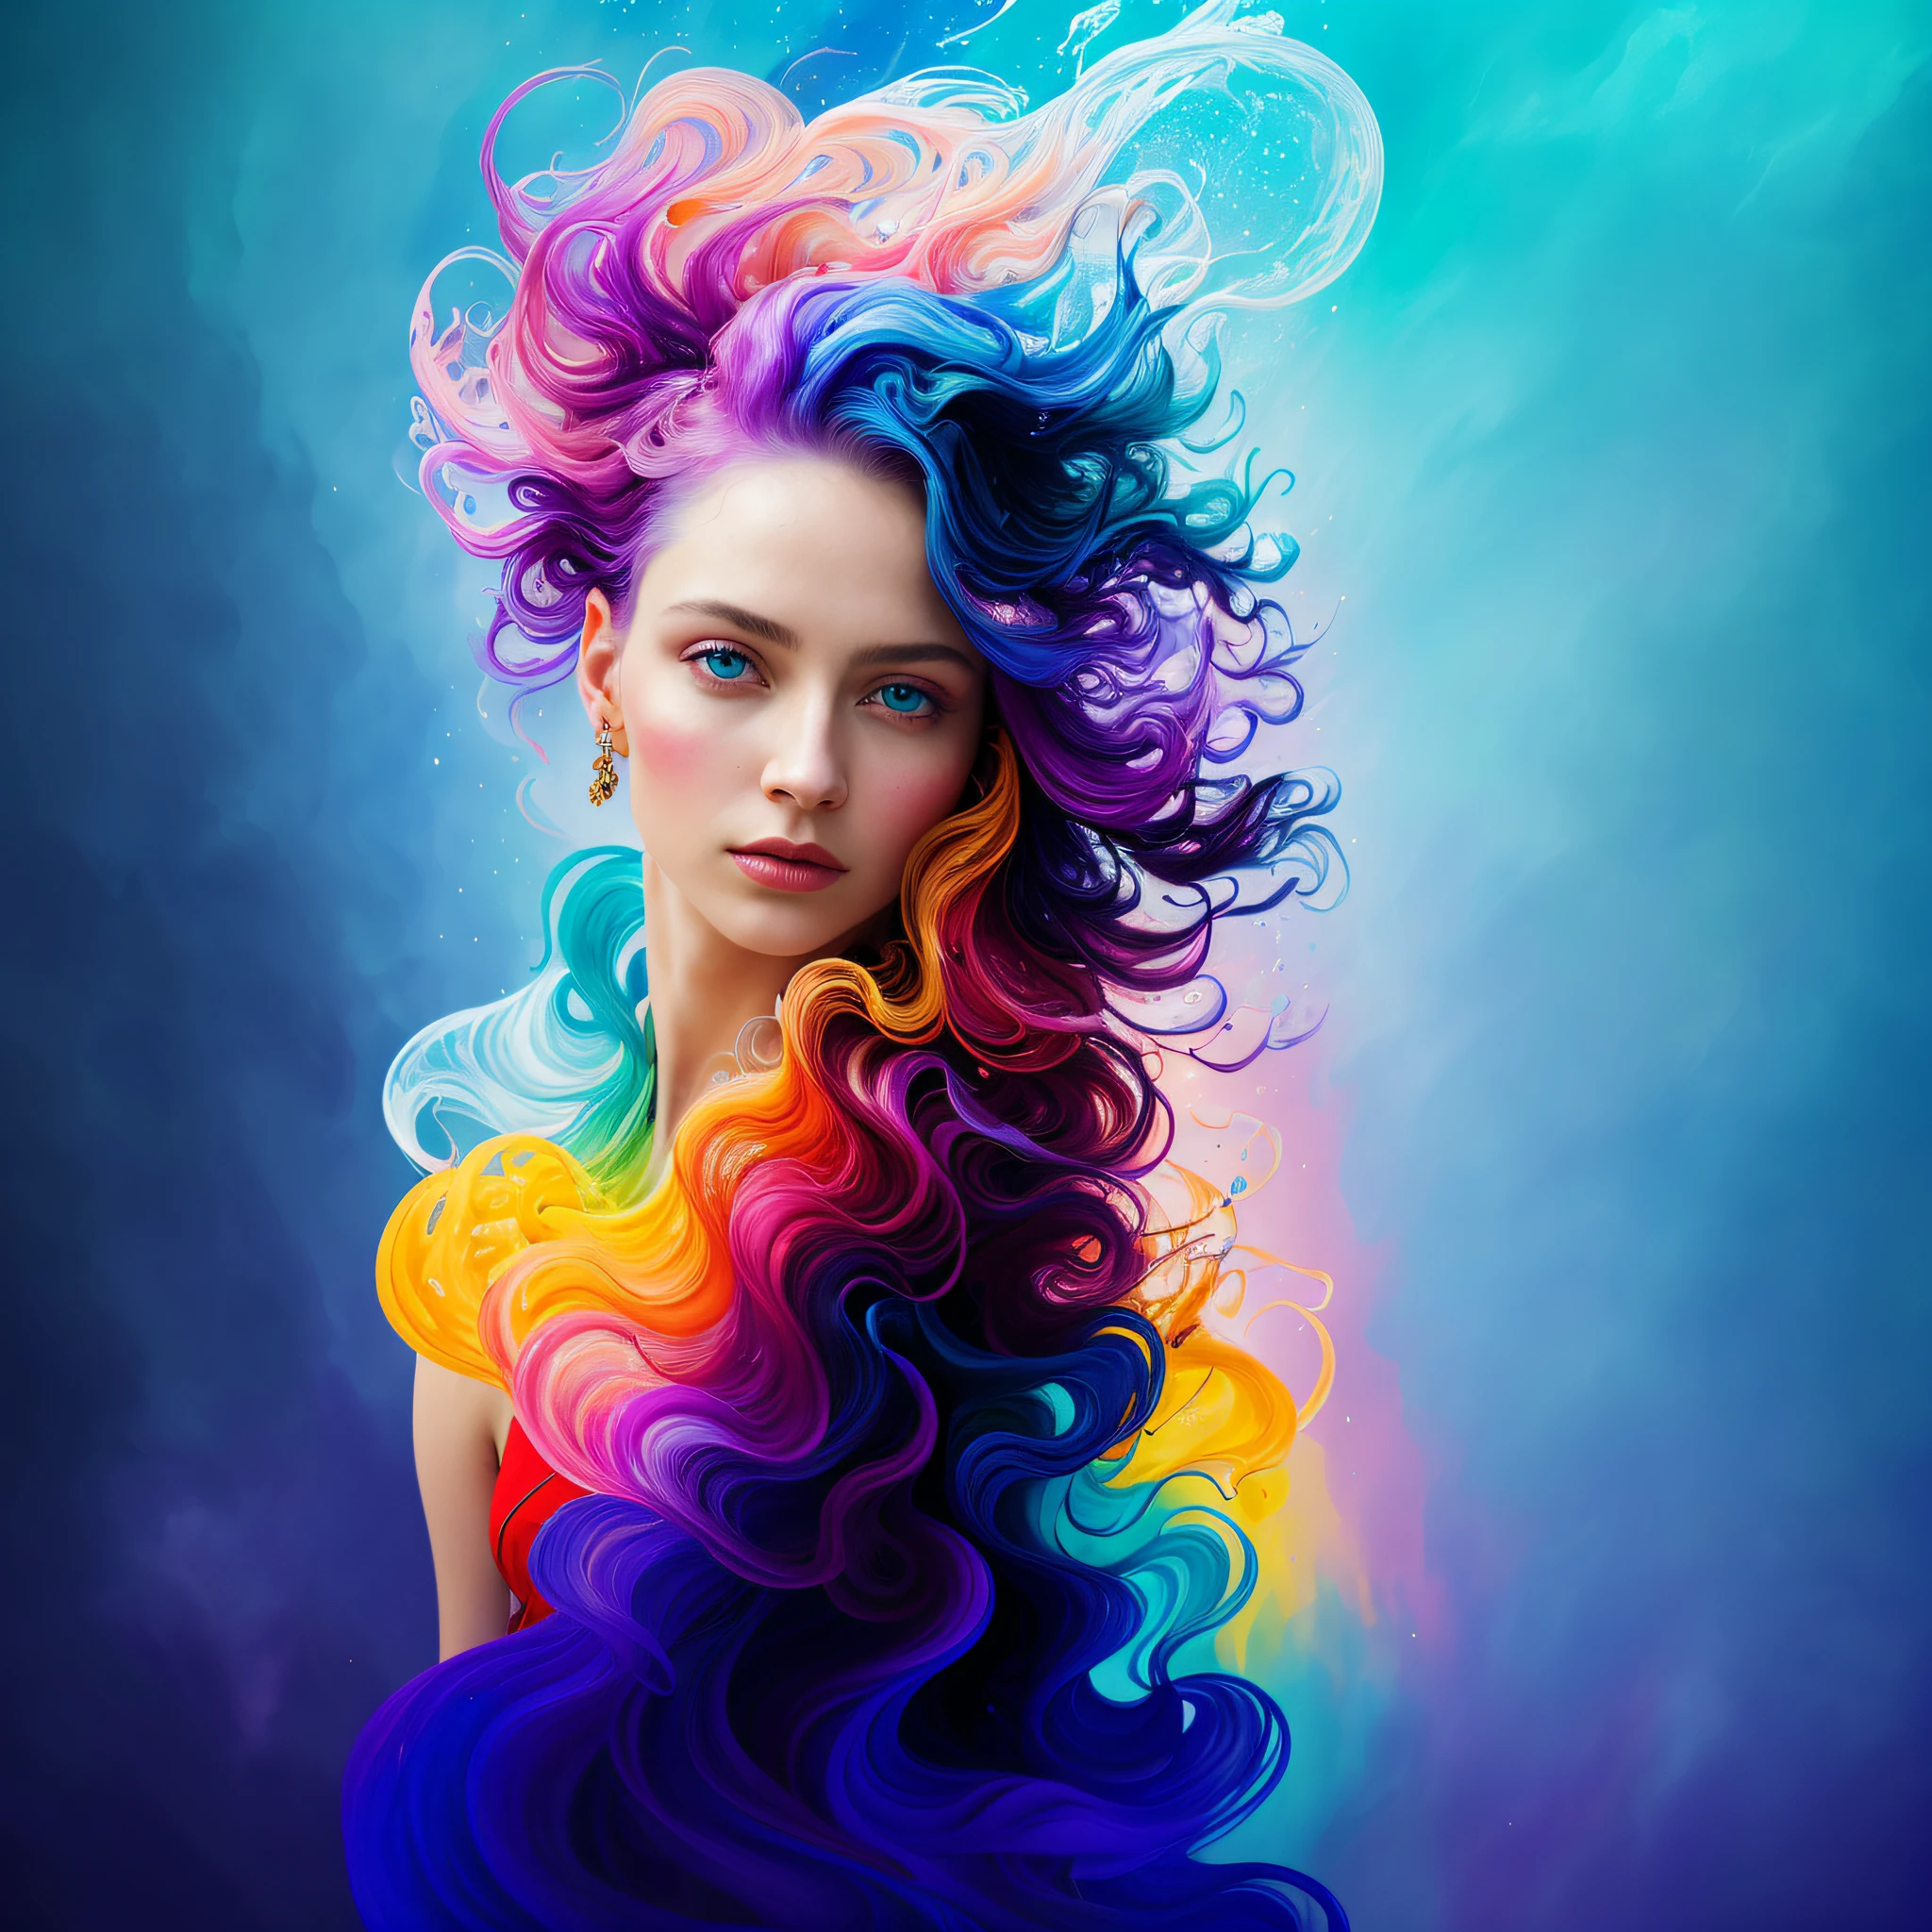 Colorful beautiful girl: a 28 year old giru, messy hair, oil painting, nice perfect face with smooth skinice perfect face, blue yellow colors, light purple and violet additions, light red additions, intricate details, home screen, 8k resolution, masterpiece, beautiful face, artstation digital painting veryblack smooth ink stream: 8k resolution photorealistic masterpiece: intricately detailed fluid gouache painting:  by Jean Baptiste Mongue: calligraphy: acrylic: watercolor art, professional photography, natural lighting, maximalist volumetric lighting photoillustration: by marton bobzert:, complex, elegant, expansive, fantastic, wavy hair, vibrant, best quality details, realistic, high definition, high quality texture, epic lighting, cinematic film still, 8k, soft lighting, anime style, masterful game card border, random colored art,  oil painting, blue yellow colors, light purple and violet additions, light red additions, intricate detail, home screen, 8k resolution, masterpiece, artstation soft digital painting very ink flowBlack: 8k resolution photorealistic masterpiece: intricately detailed fluid gouache painting: by Jean Baptiste Mongue: calligraphy: acrylic: watercolor art, professional photography, natural lighting, maximalist volumetric lighting photoillustration: by Marton Bobzert:,  complex, elegant, expansive, fantastic, vibrant